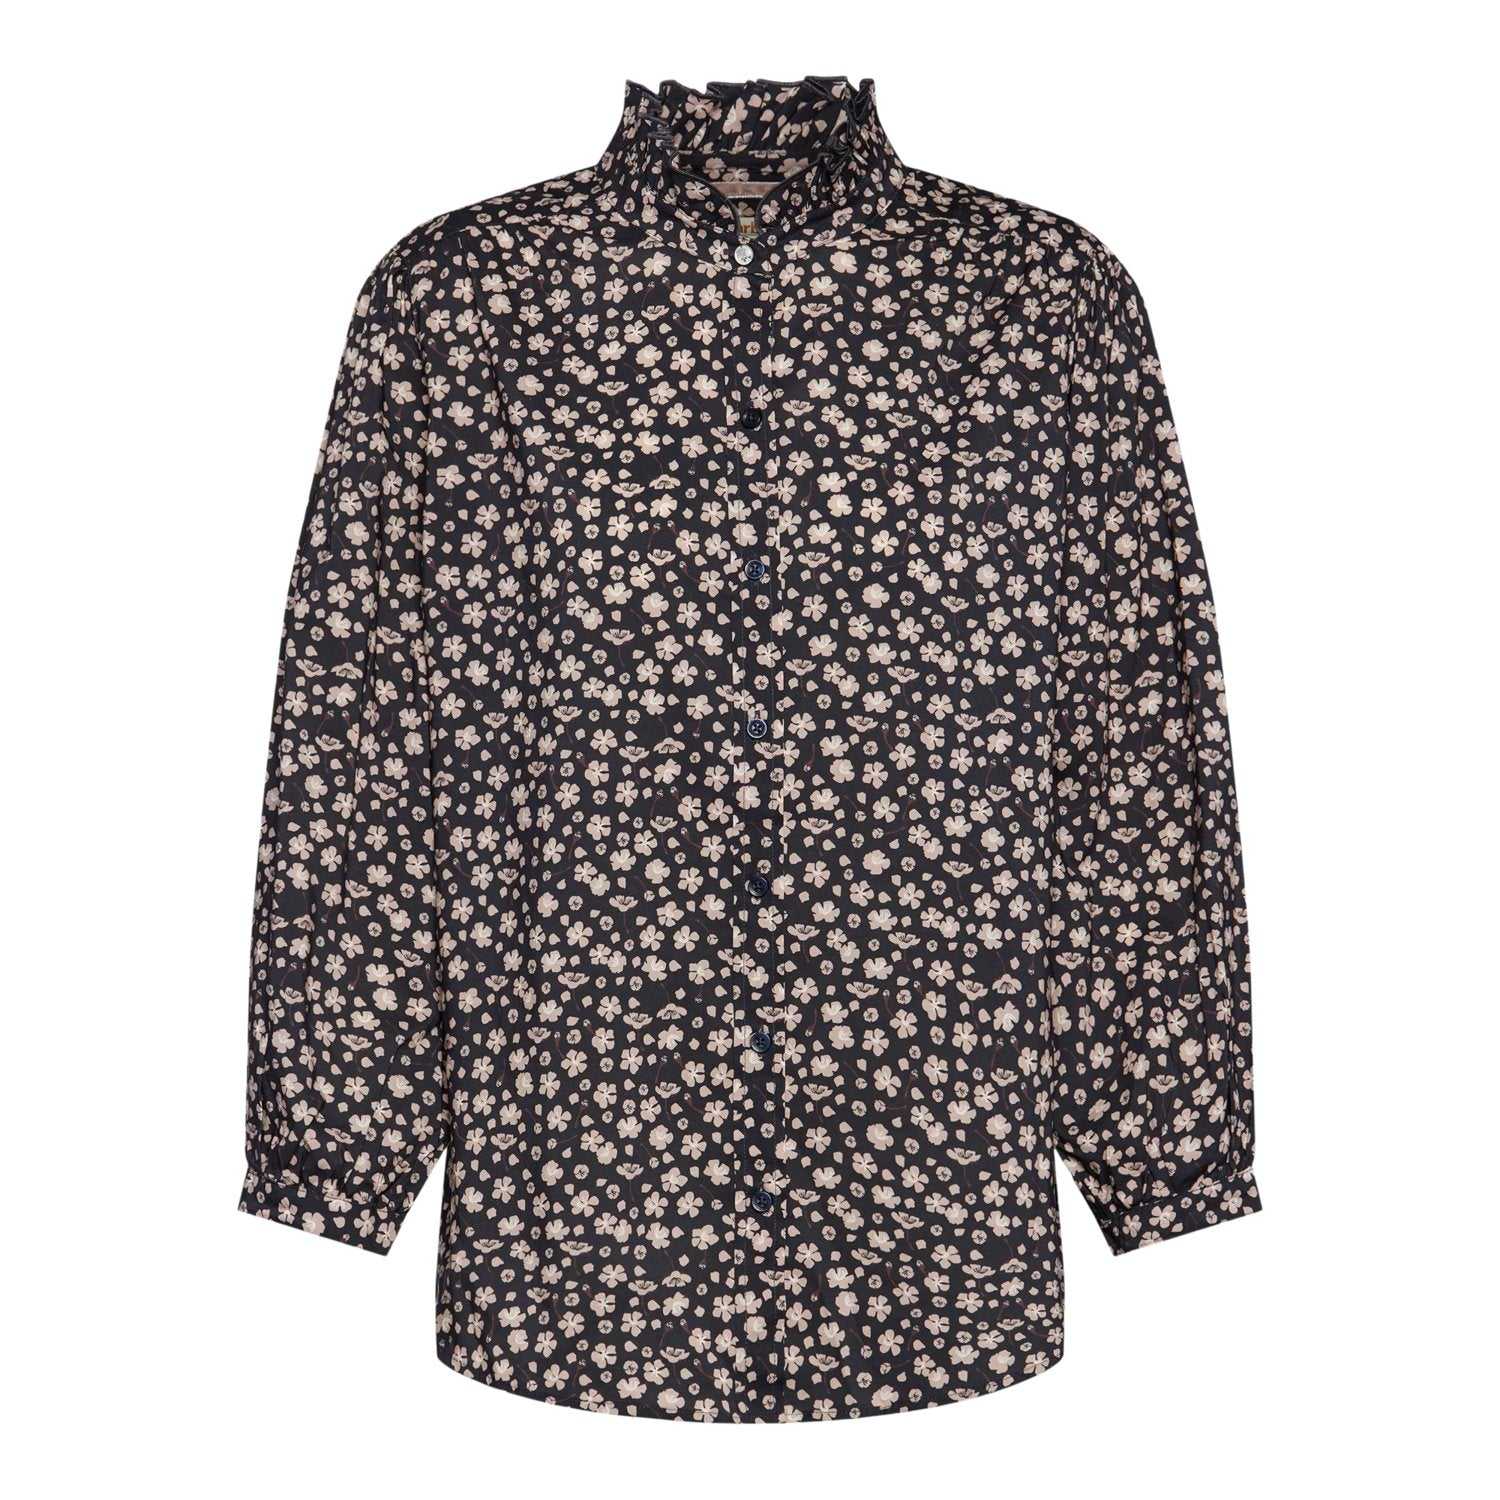 Stavia Floral Printed Blouse